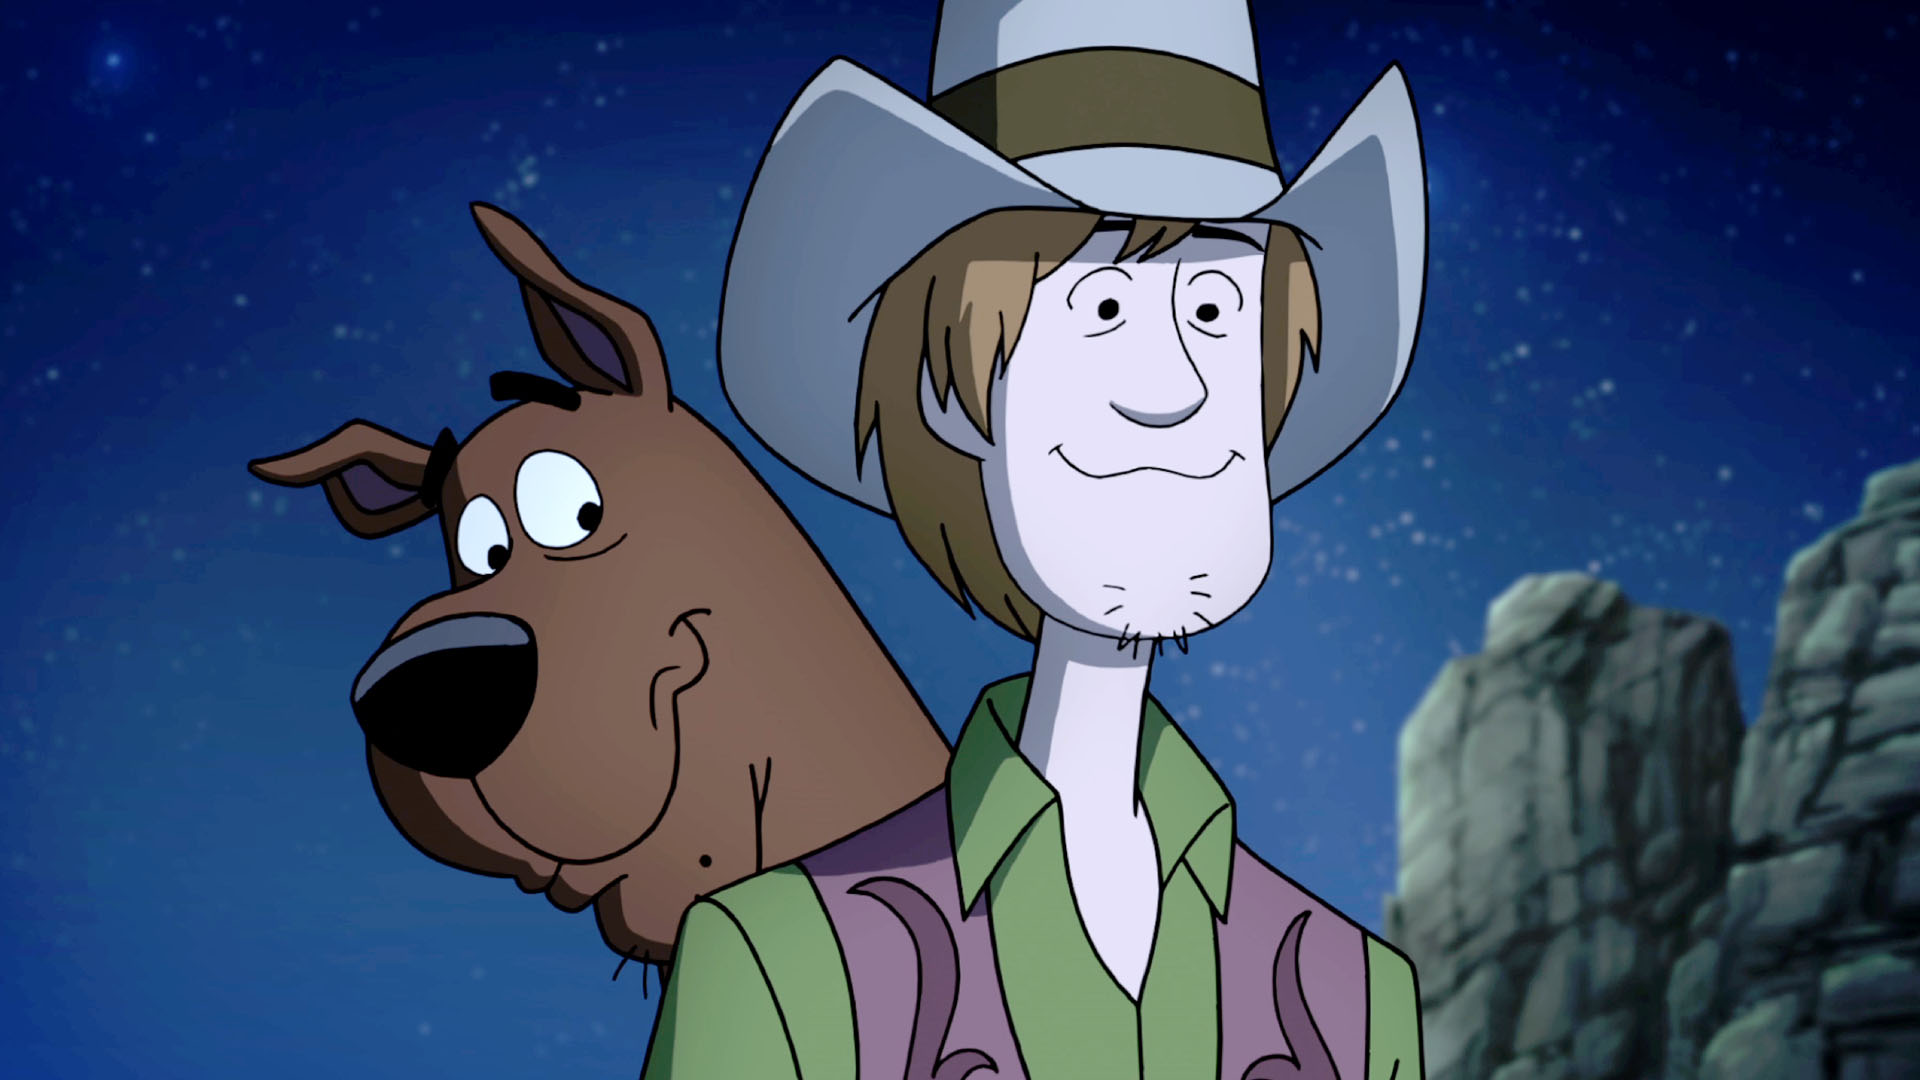 Scooby Doo Shaggys Showdown Trailer 1 Trailers And Videos Rotten Tomatoes